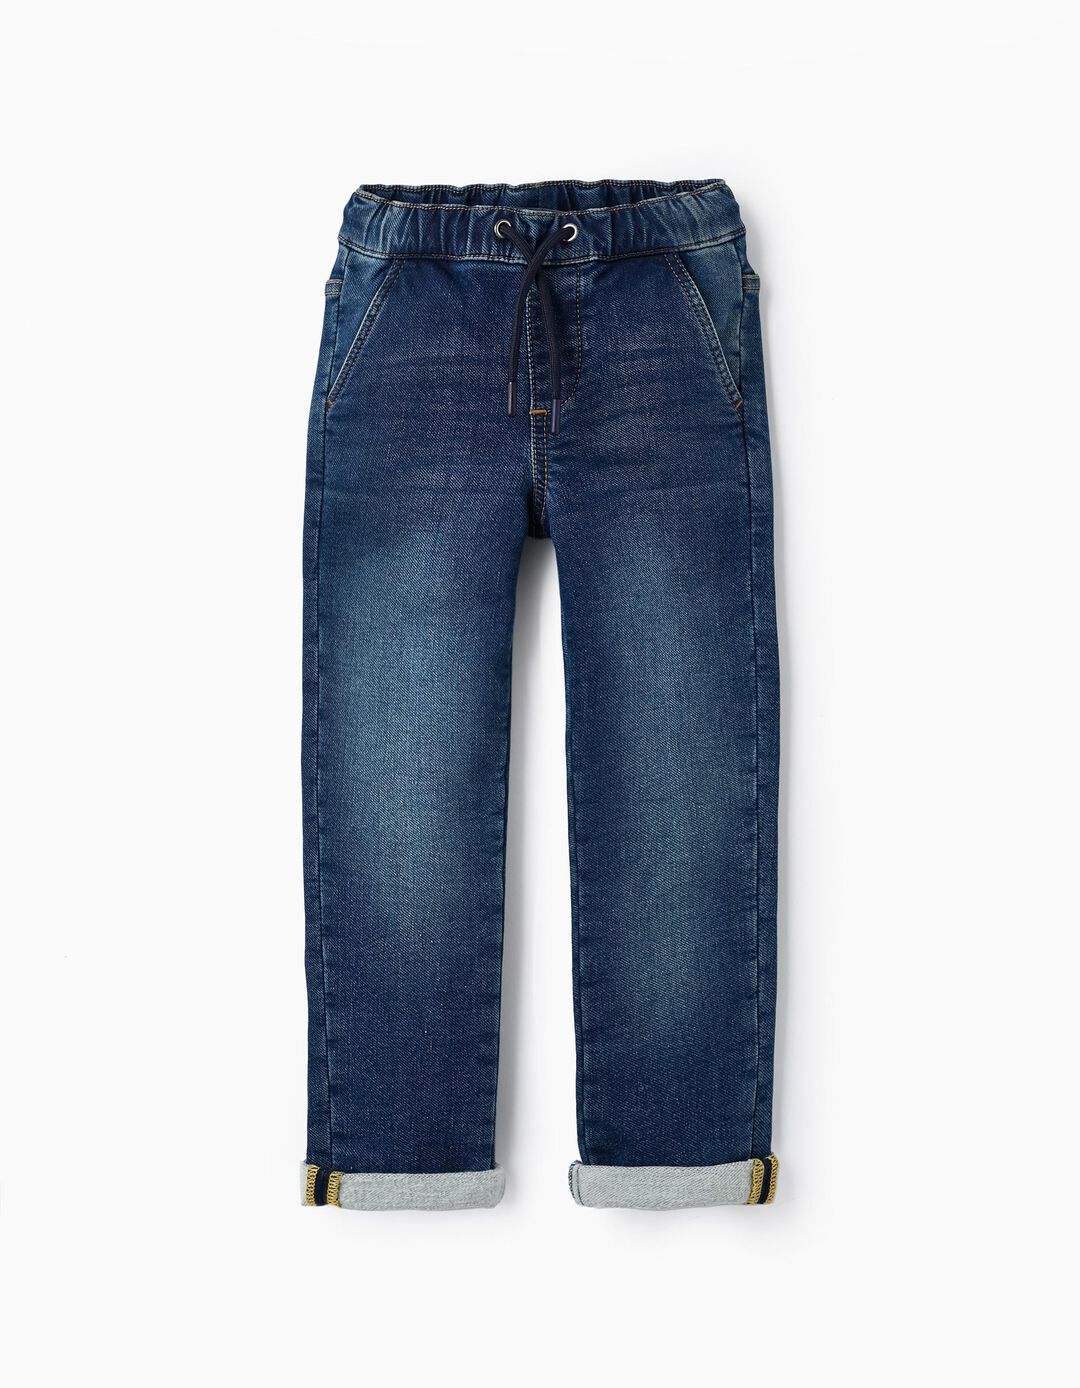 Sporty Denim Trousers in Cotton for Boys, Blue